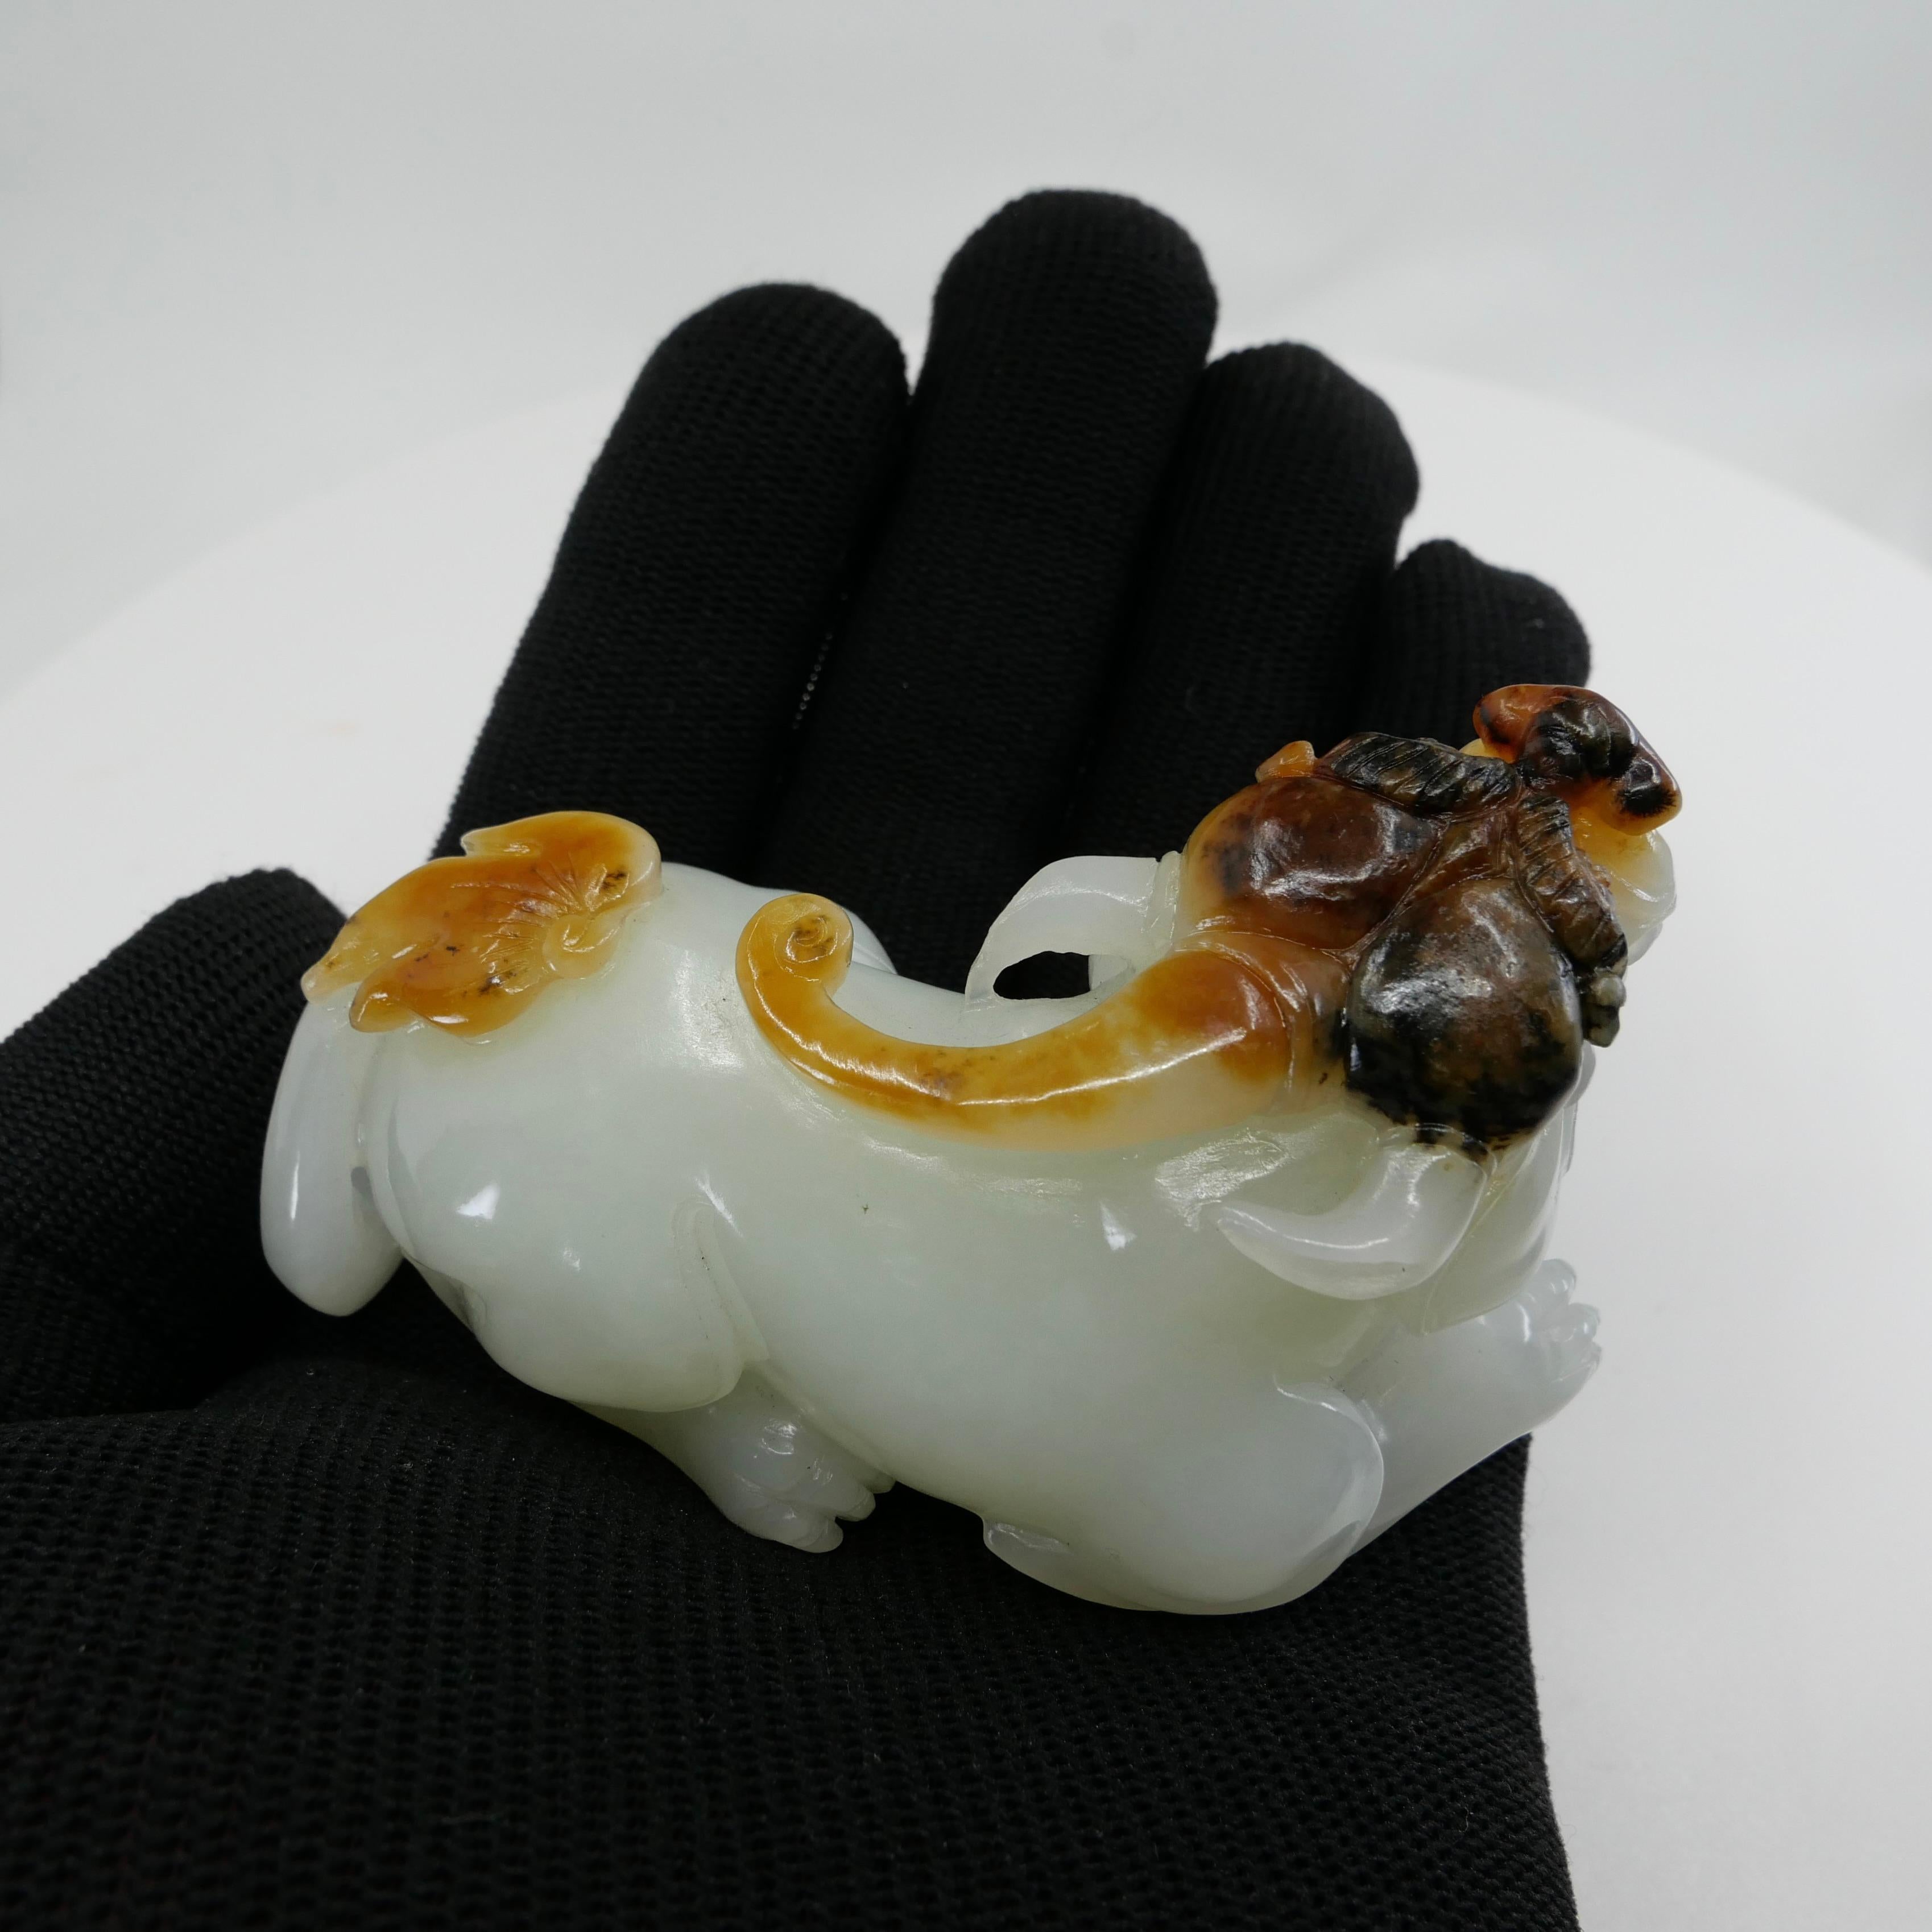 Please check out the HD video! For your consideration is a certified natural nephrite jade. This jade carving is of a Chinese mythical beast or creature. Traditionally Chinese mythical creatures are regarded as auspicious creatures that possessed